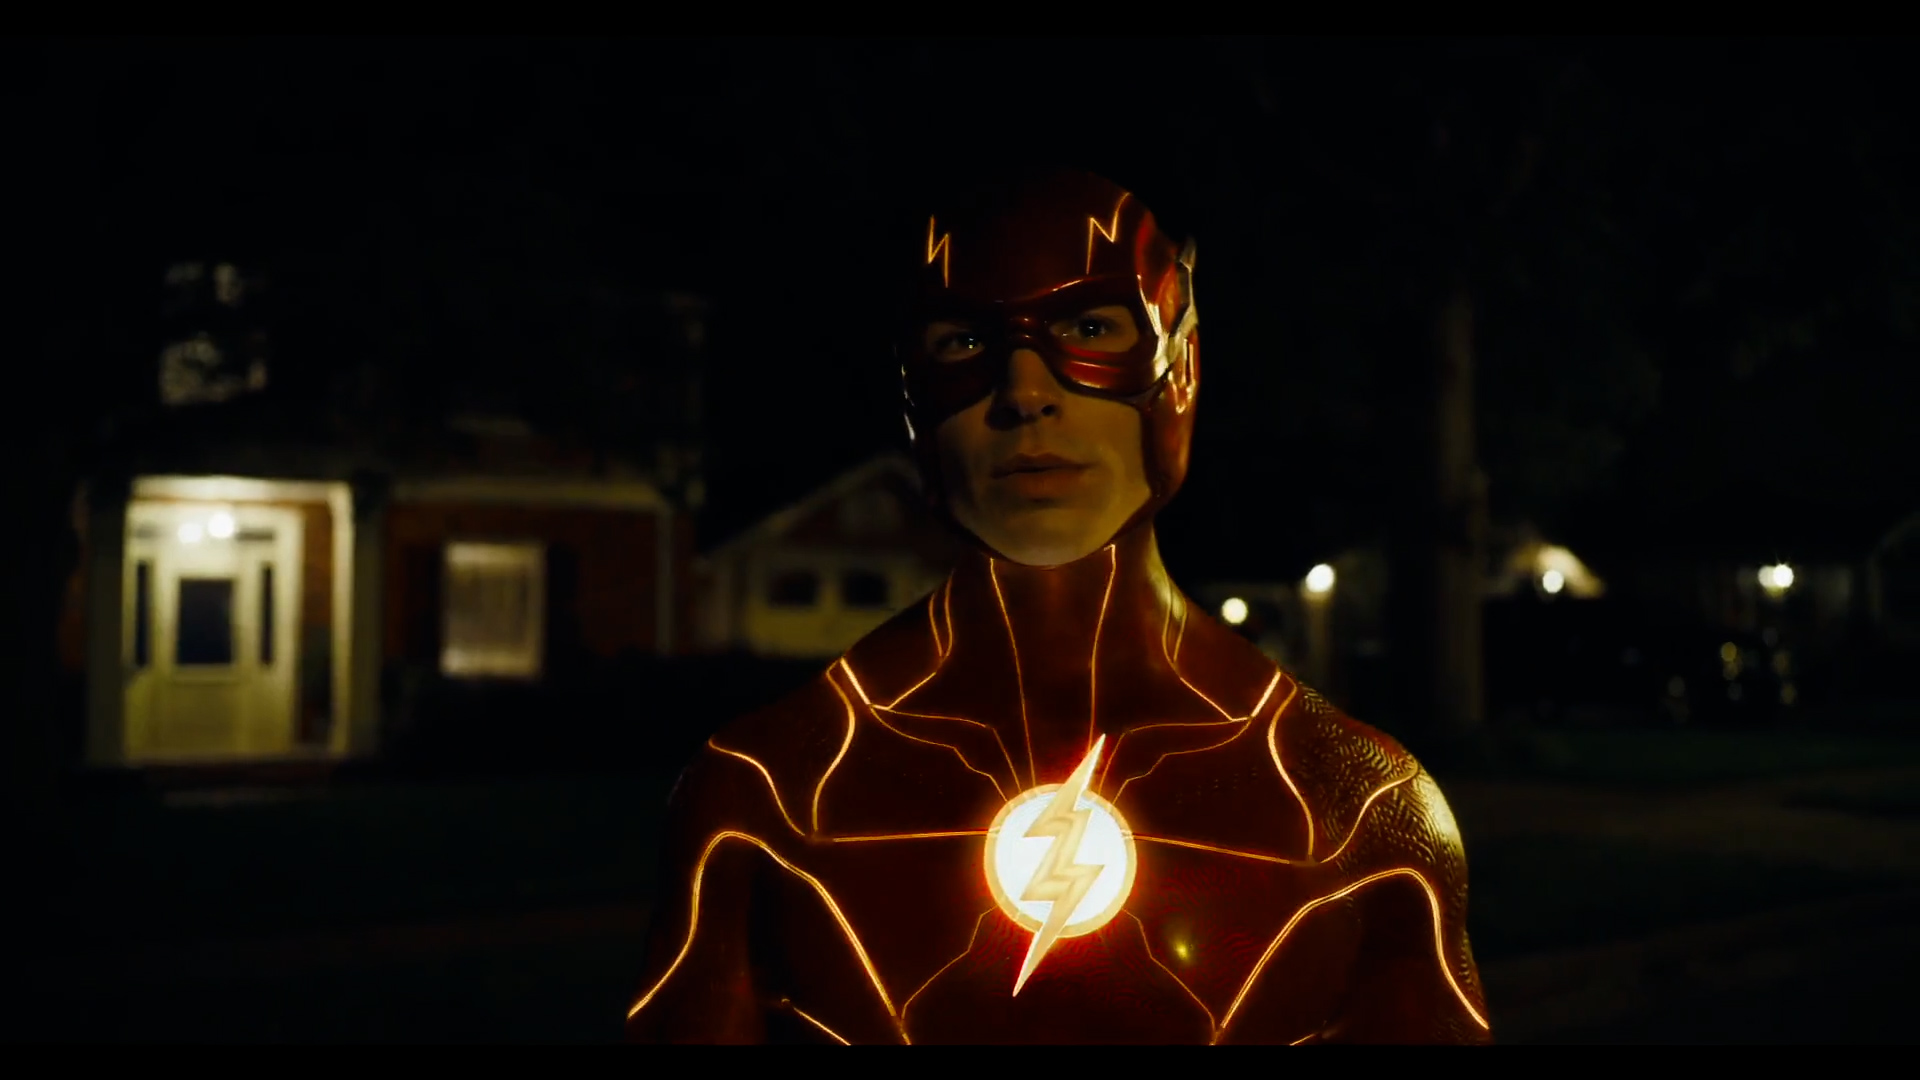 The Flash, played by Ezra Miller, teams up with two Batmans in the Super Bowl trailer.